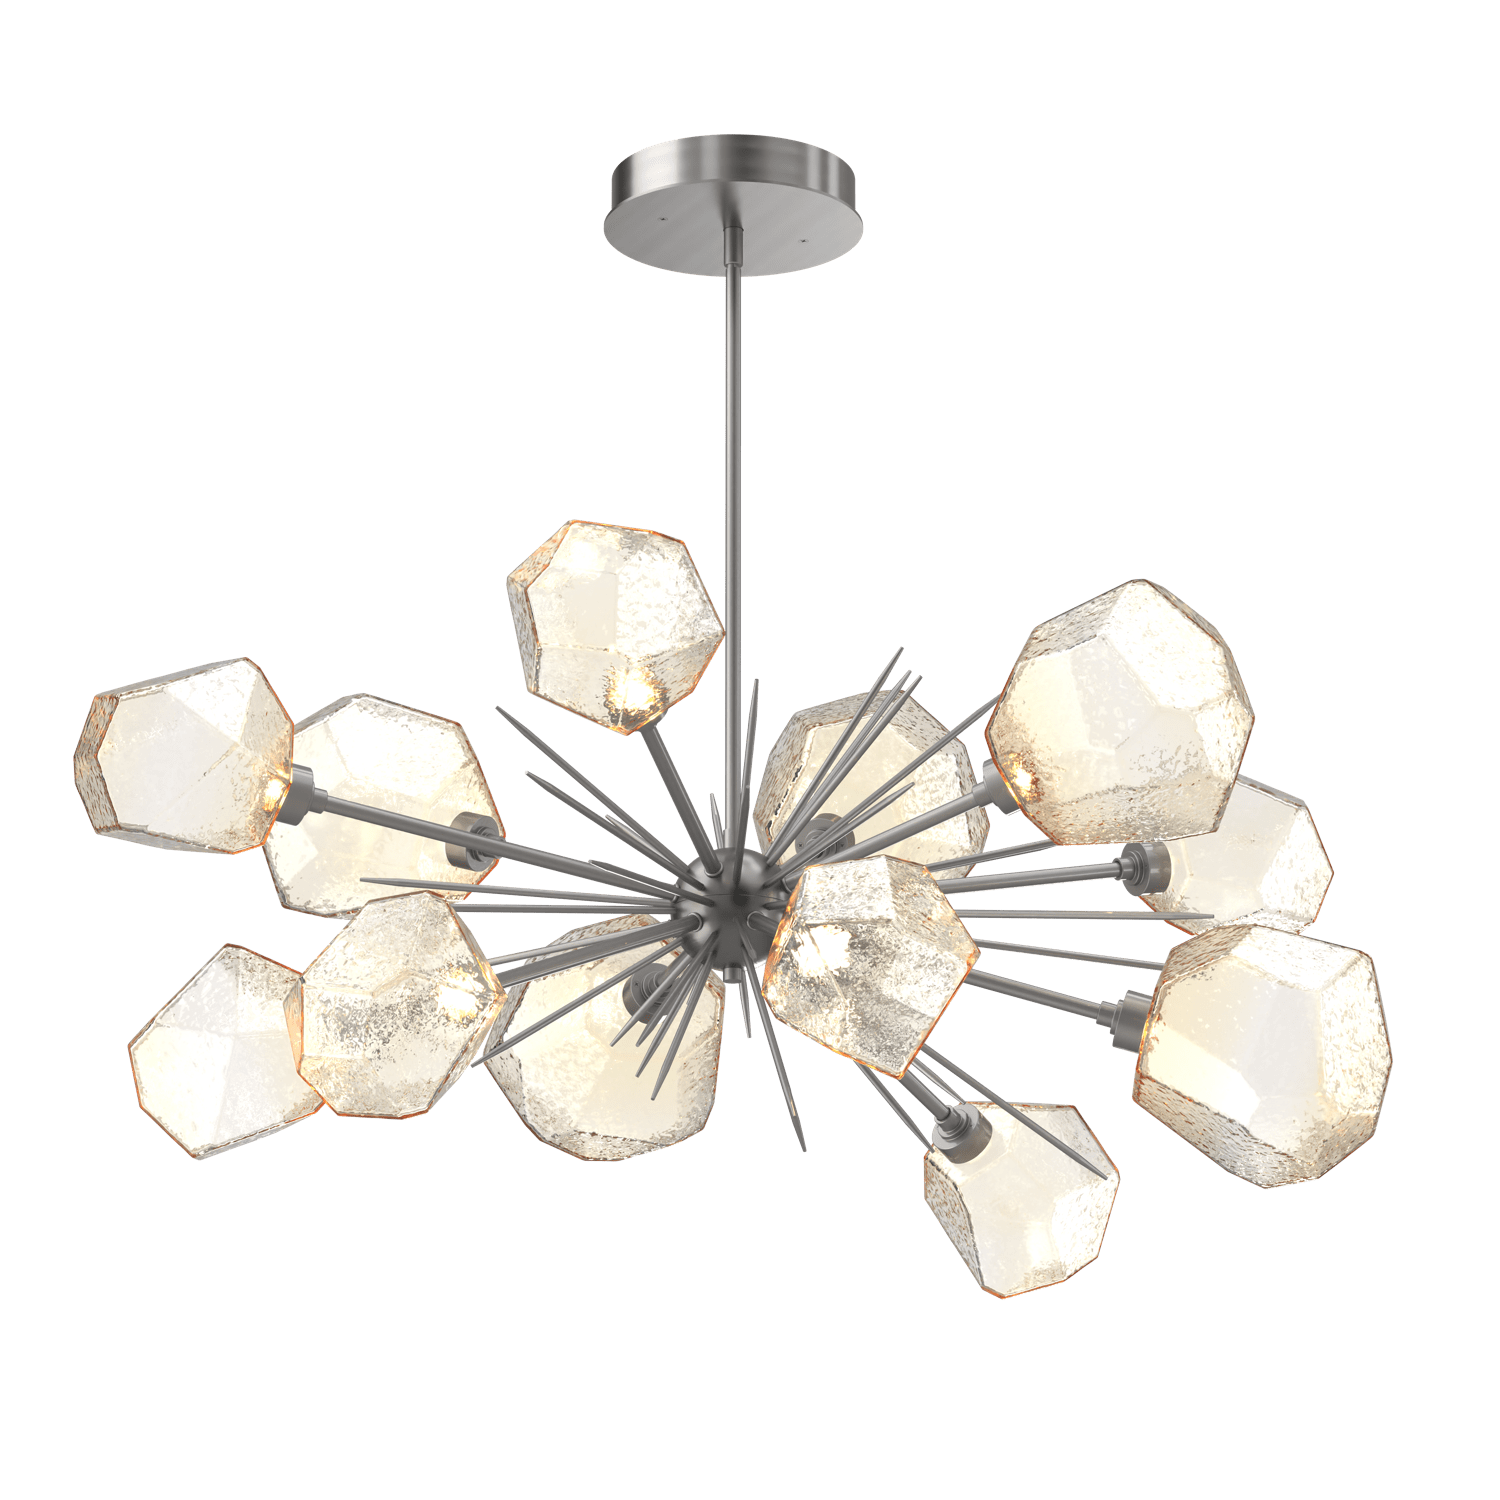 PLB0039-0D-SN-A-Hammerton-Studio-Gem-43-inch-oval-starburst-chandelier-with-satin-nickel-finish-and-amber-blown-glass-shades-and-LED-lamping